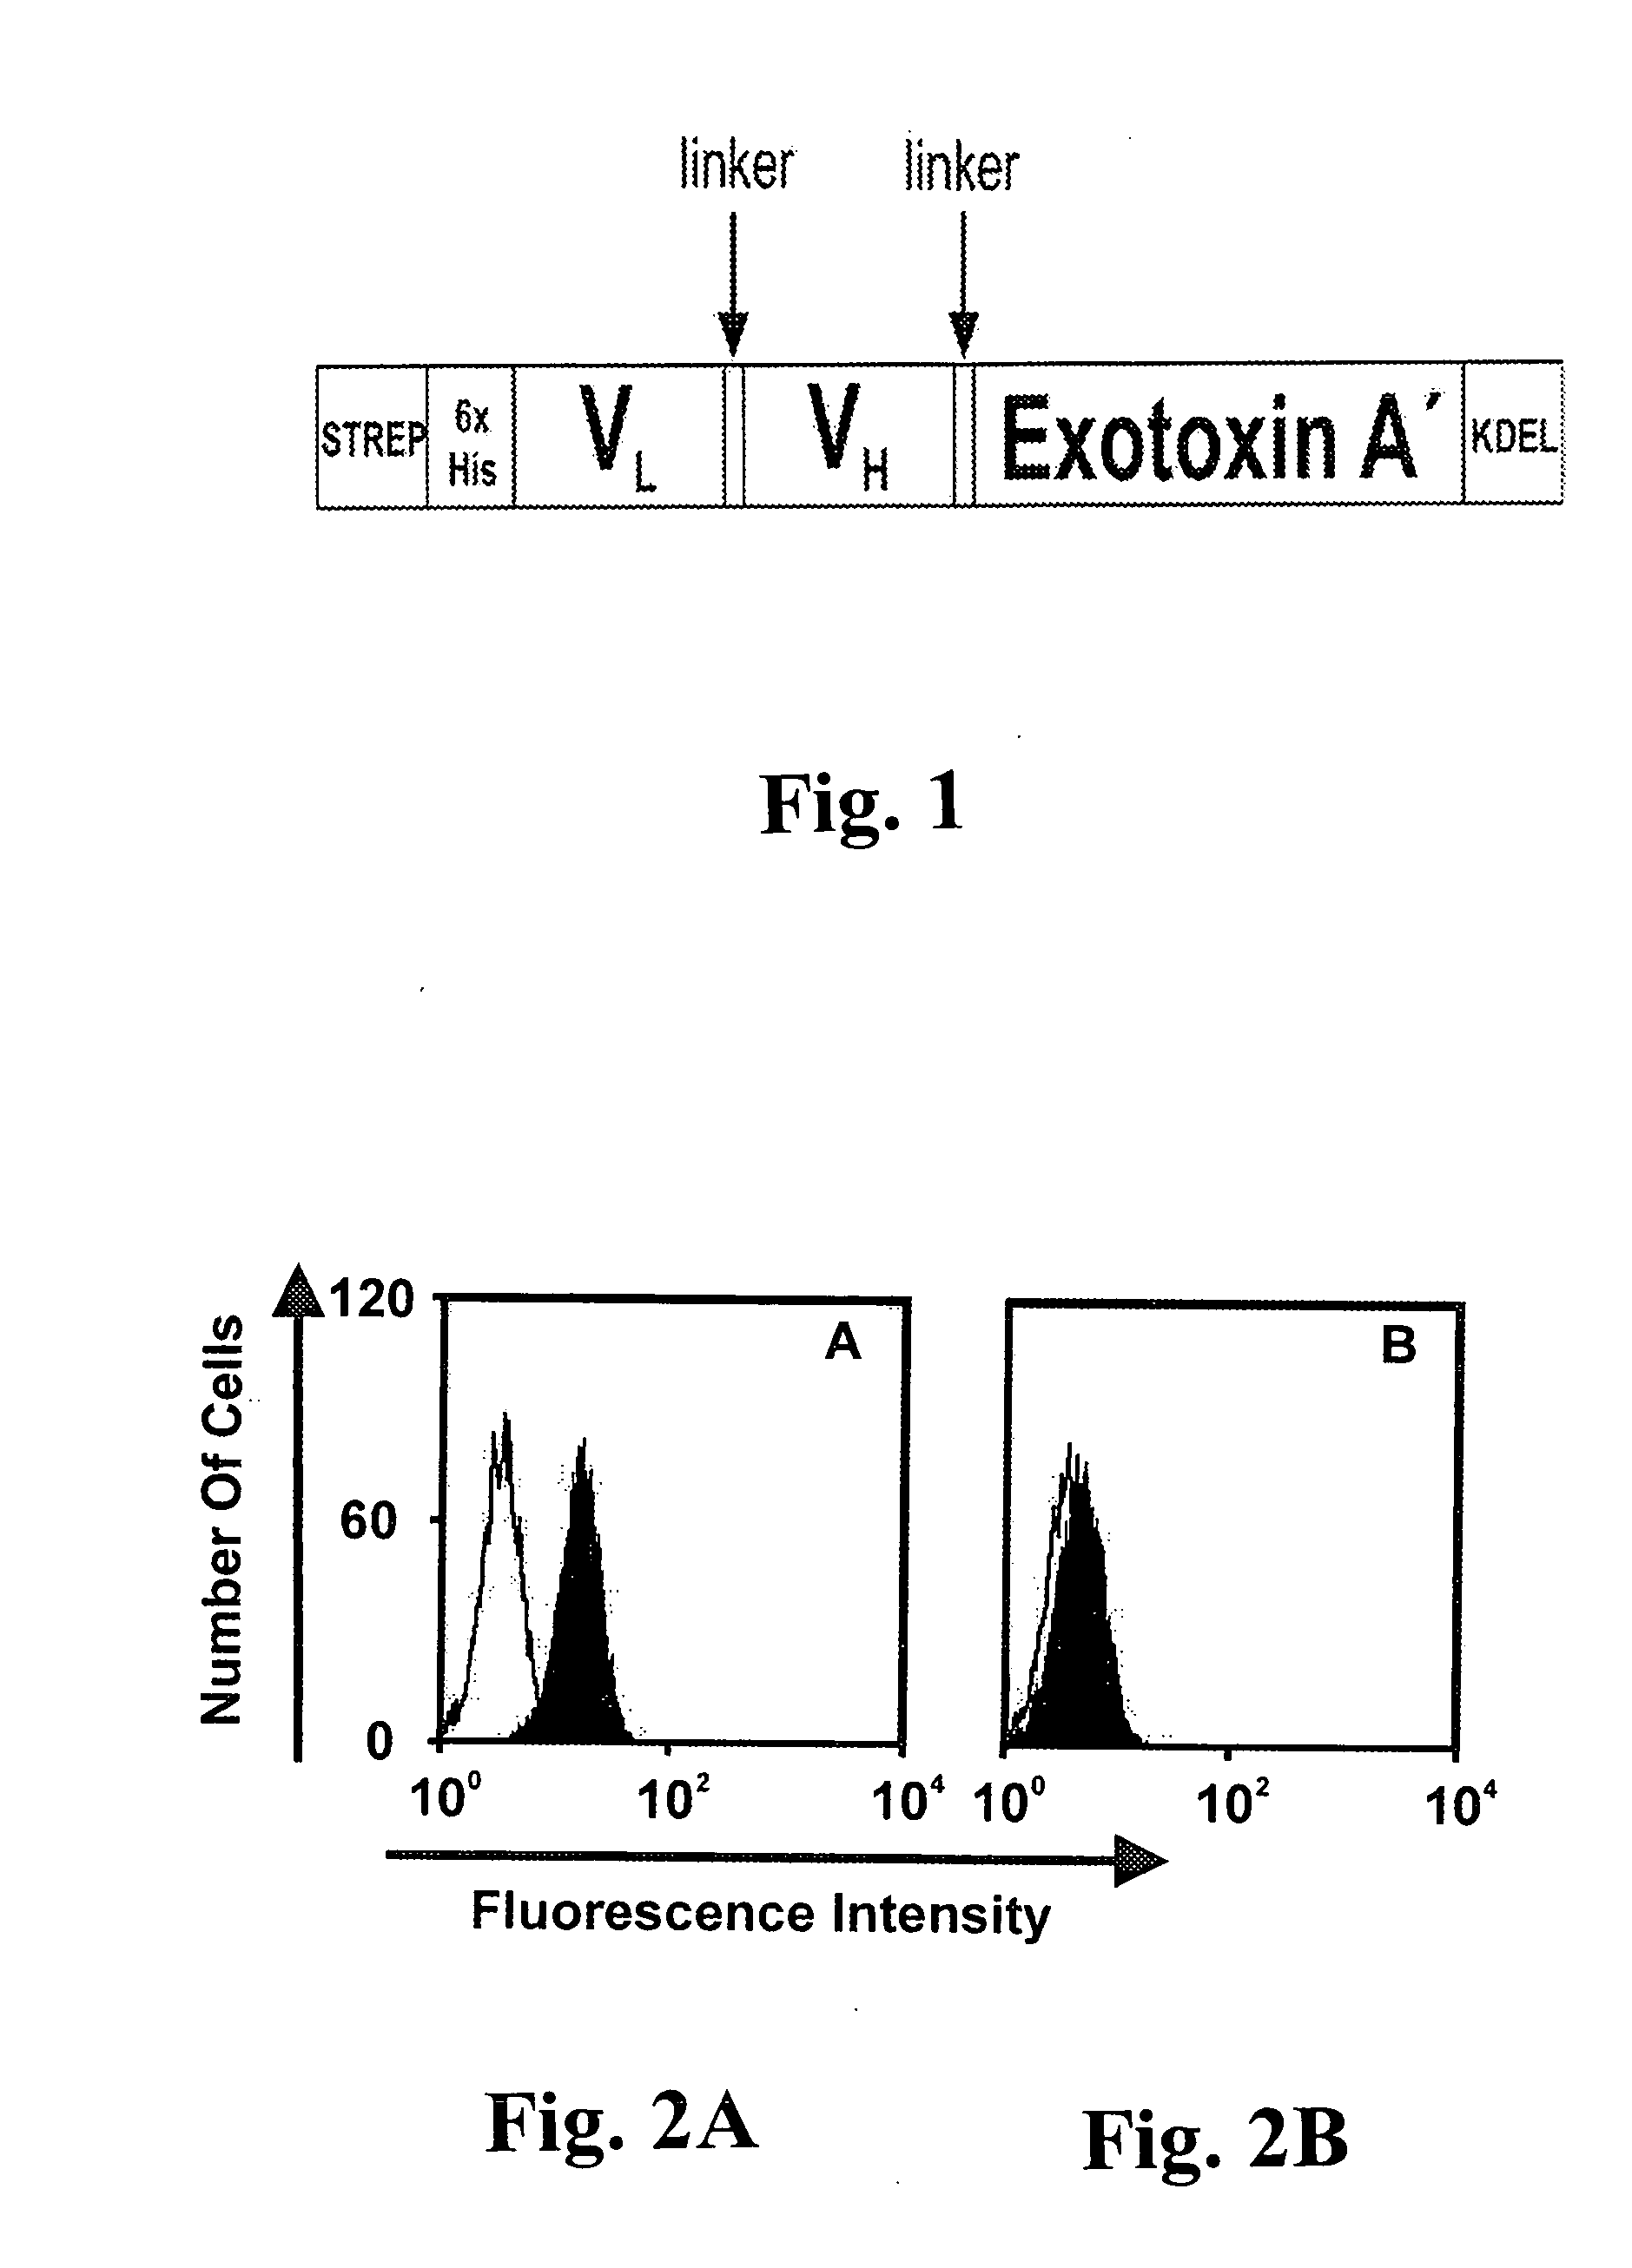 CD19-specific immunotoxin and treatment method